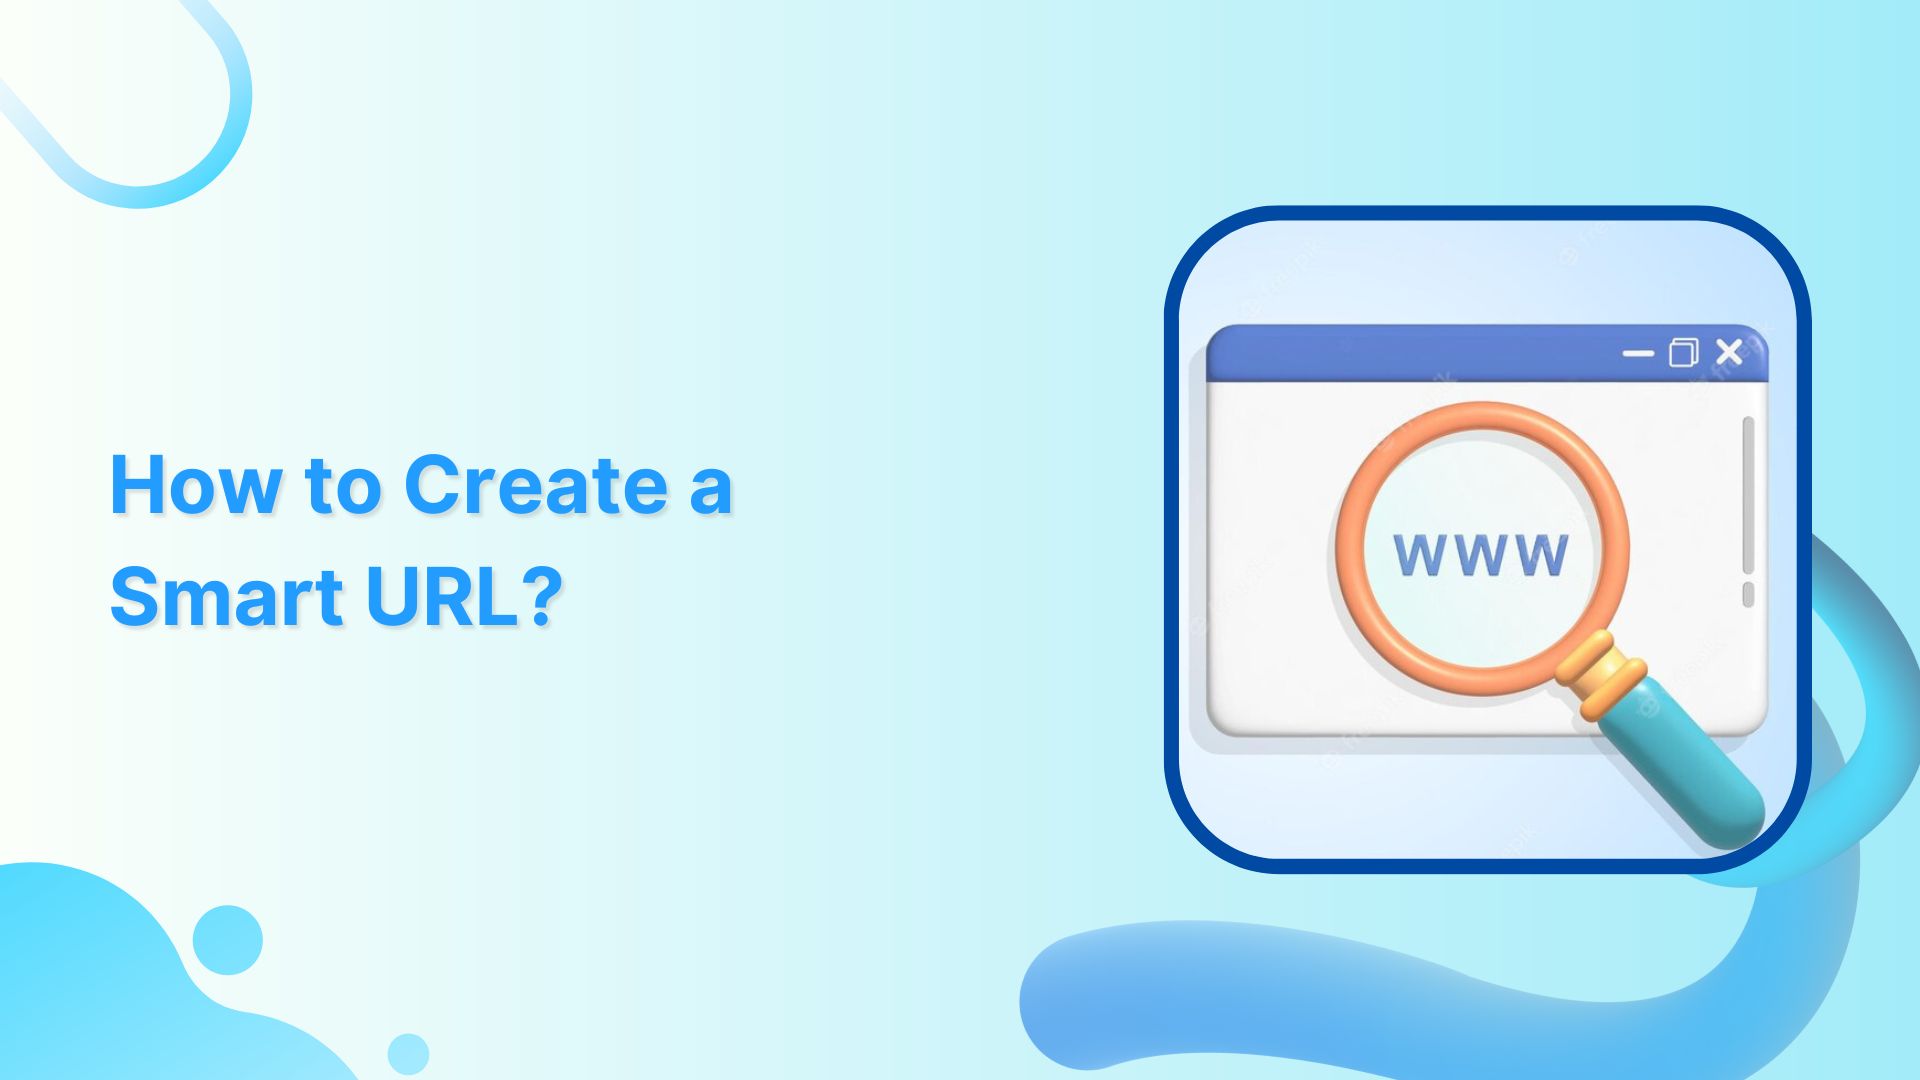 How to Create a Smart URL Link: Step-by-Step Guide